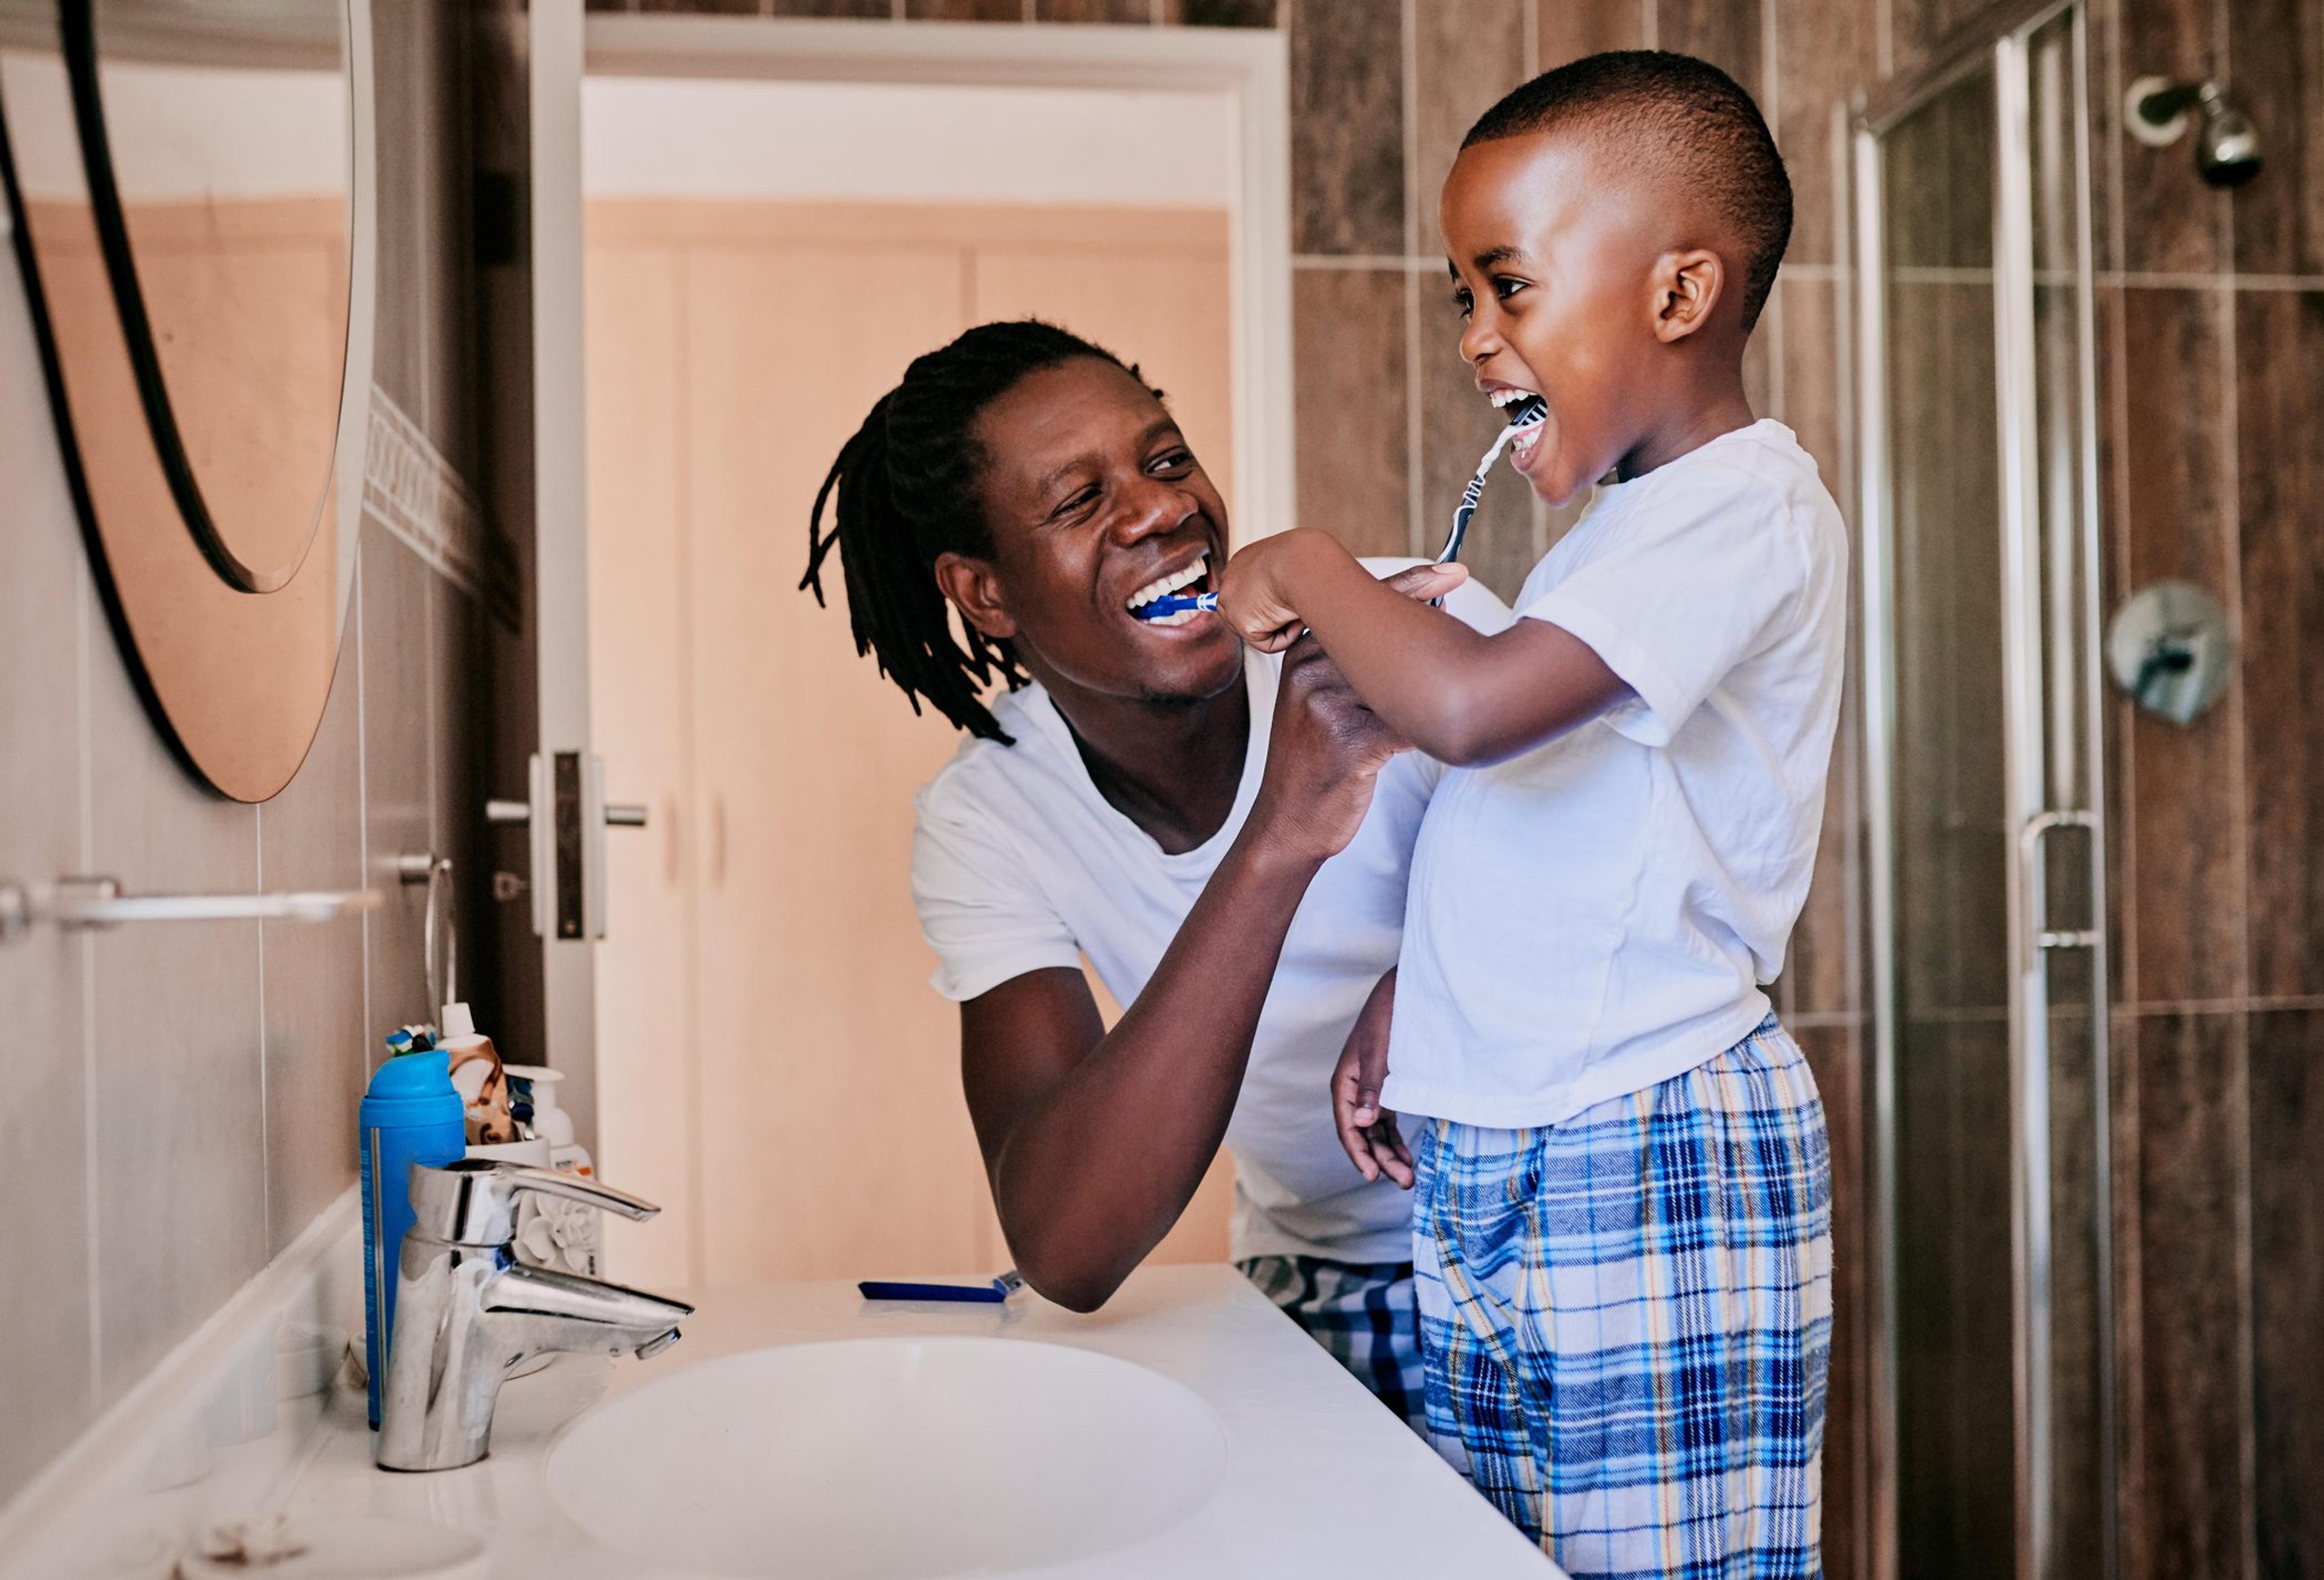 Father helps his son brush his teeth teaching good dental habits to children